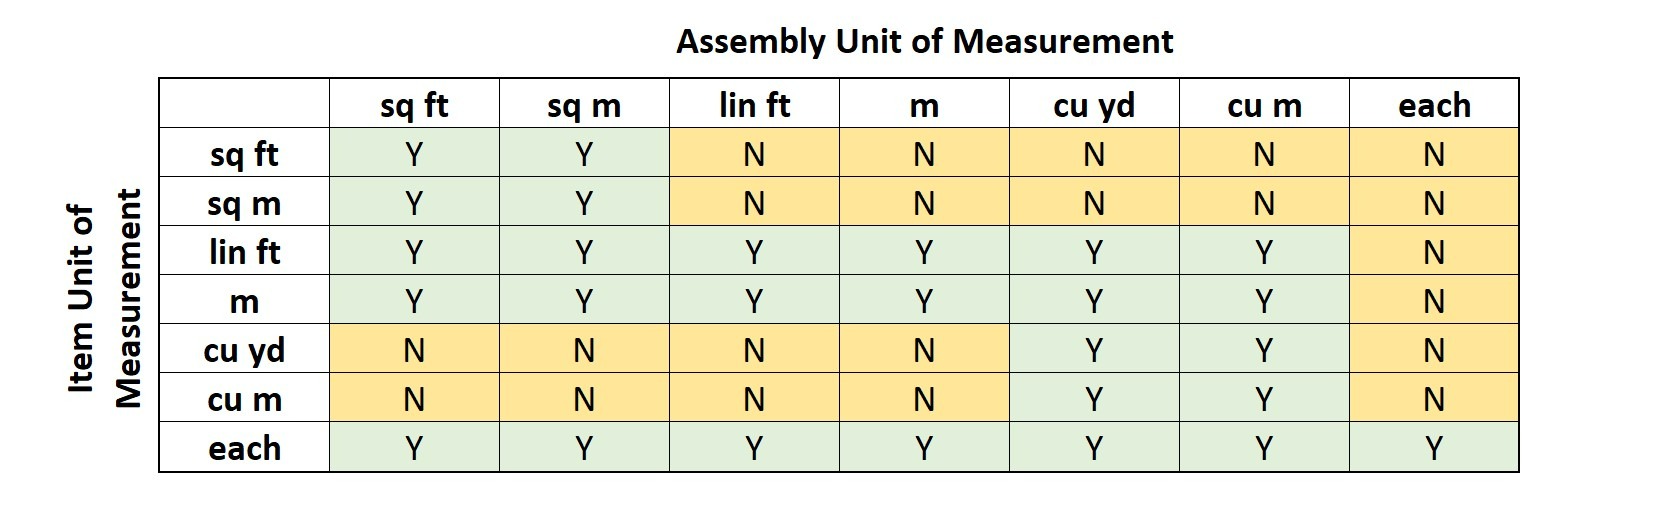 Acceptable Mismatches - Assembly / Item Units of Measurement Table